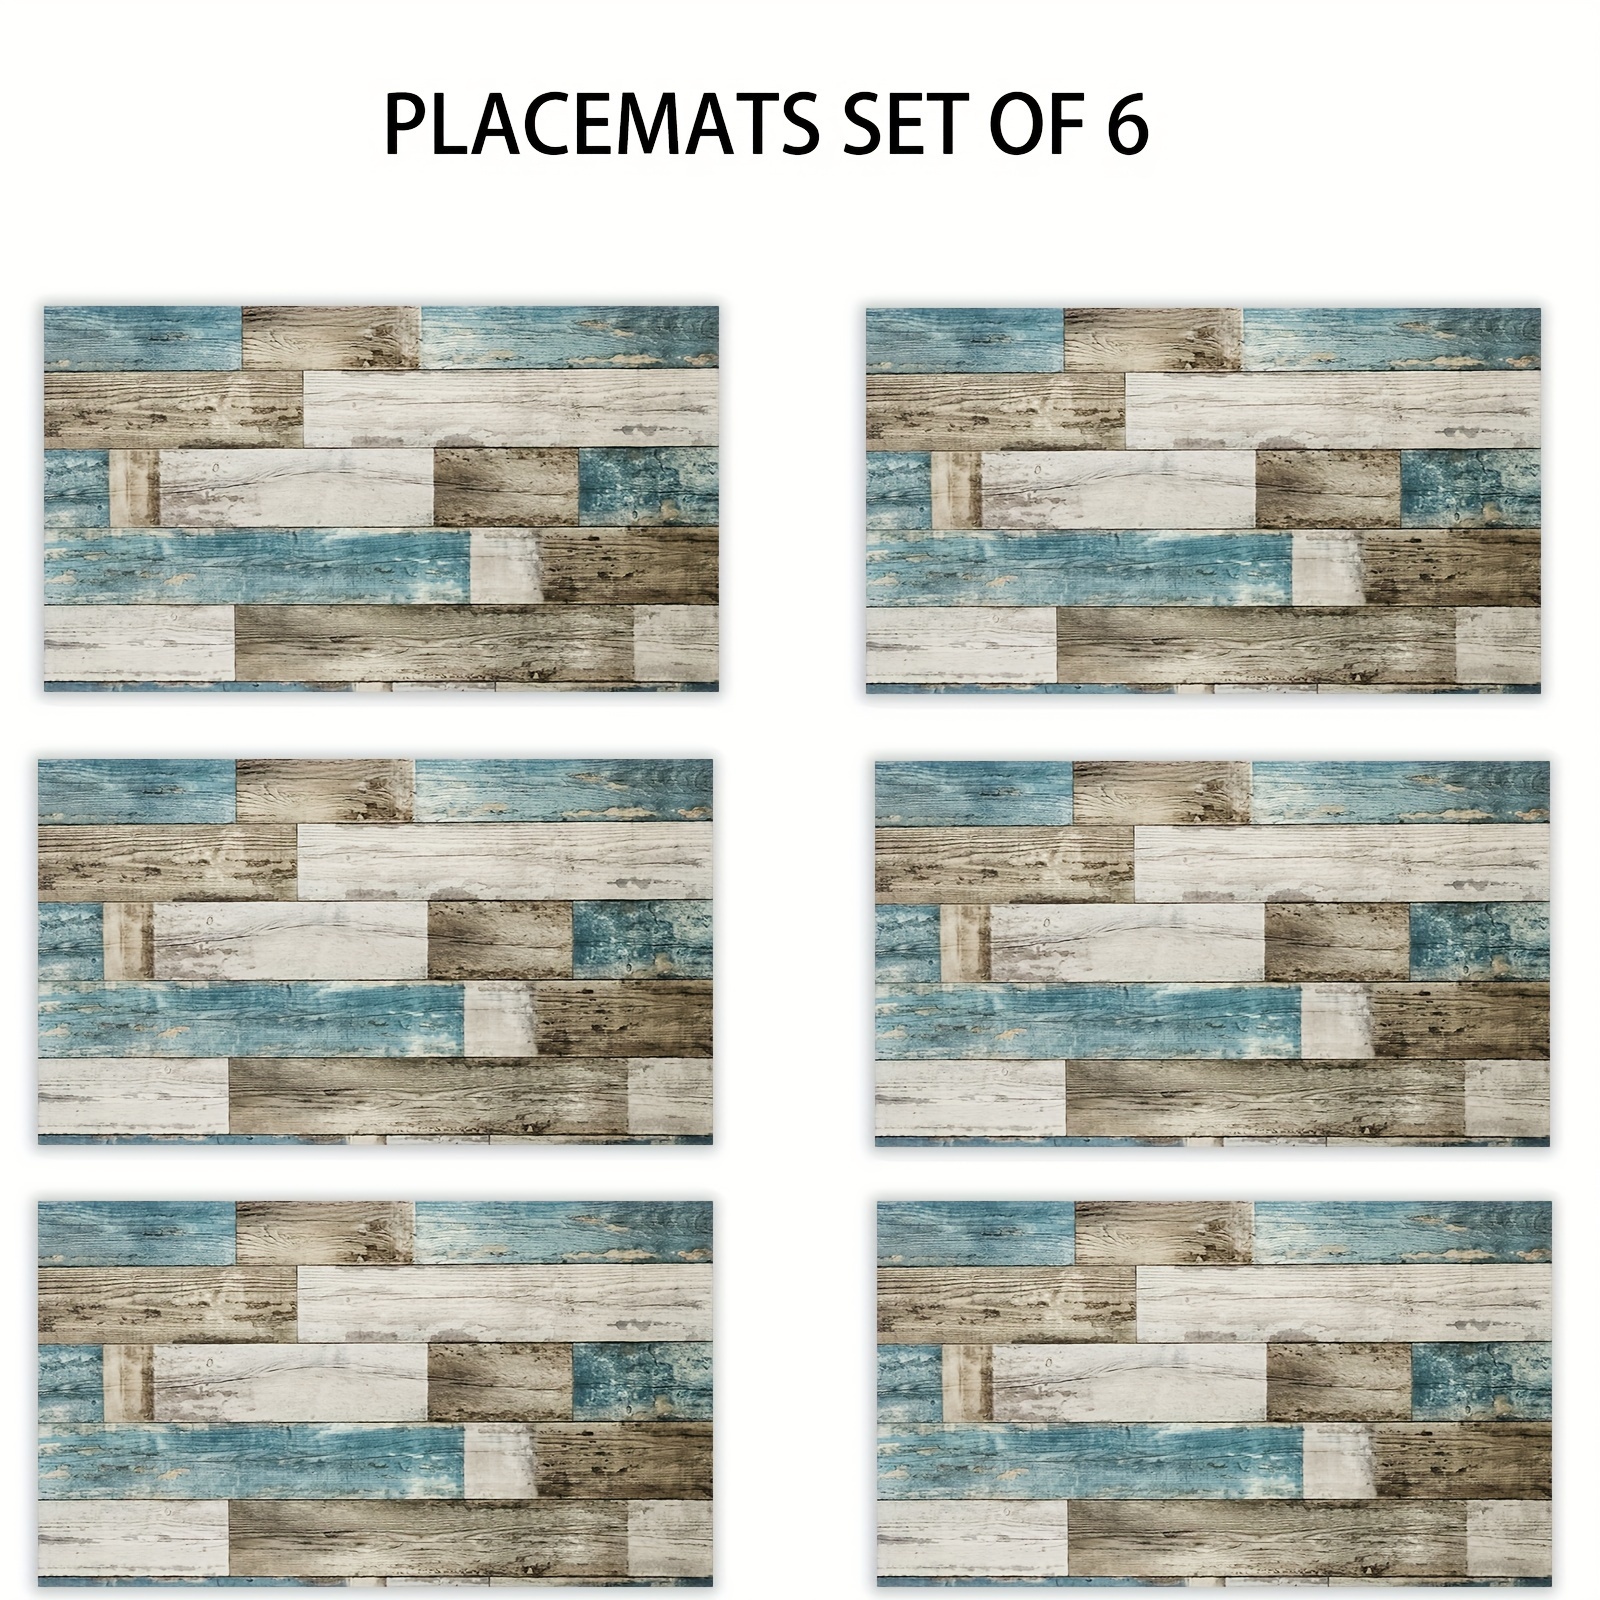 

Jit4 /6 Pieces Set Of Rustic Wooden Pattern Linen Table Placemats - Machine Washable, Suitable For Festive Parties, Kitchen And Dining Room Decor, Home Décor, Party Decoration, Holiday Décor